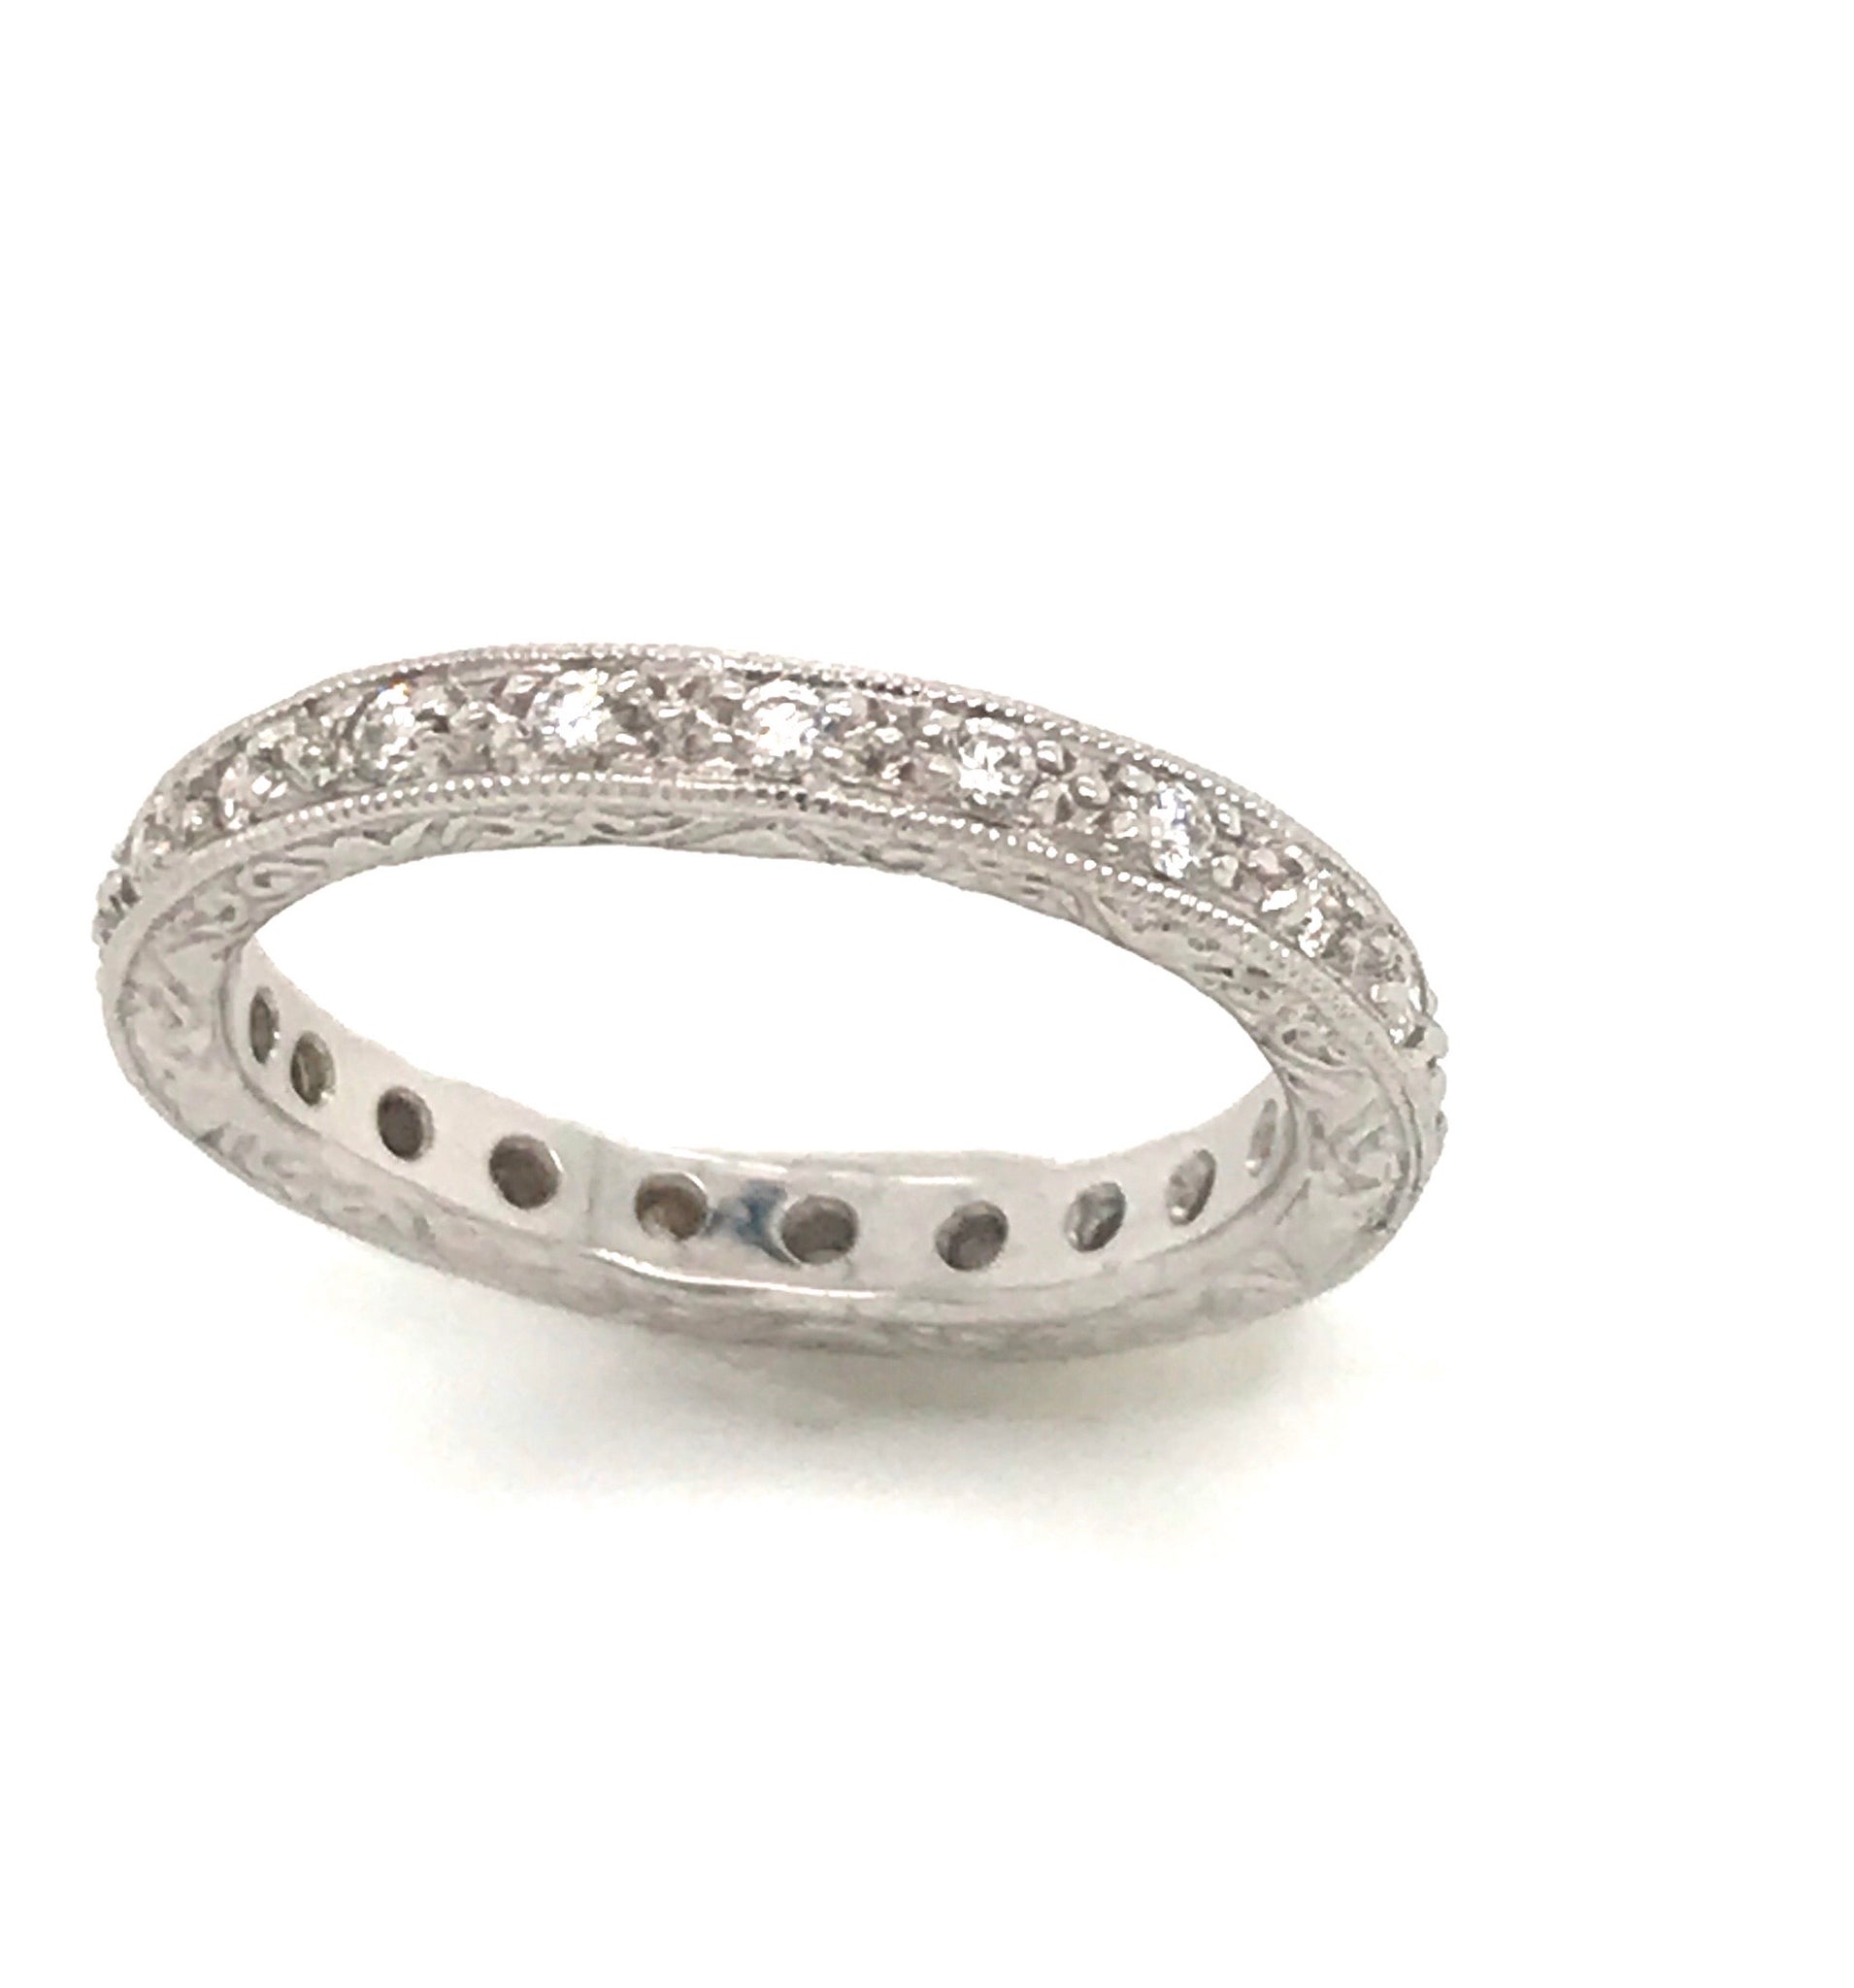 18kt white gold Pave' Linear Thin Eternity Band